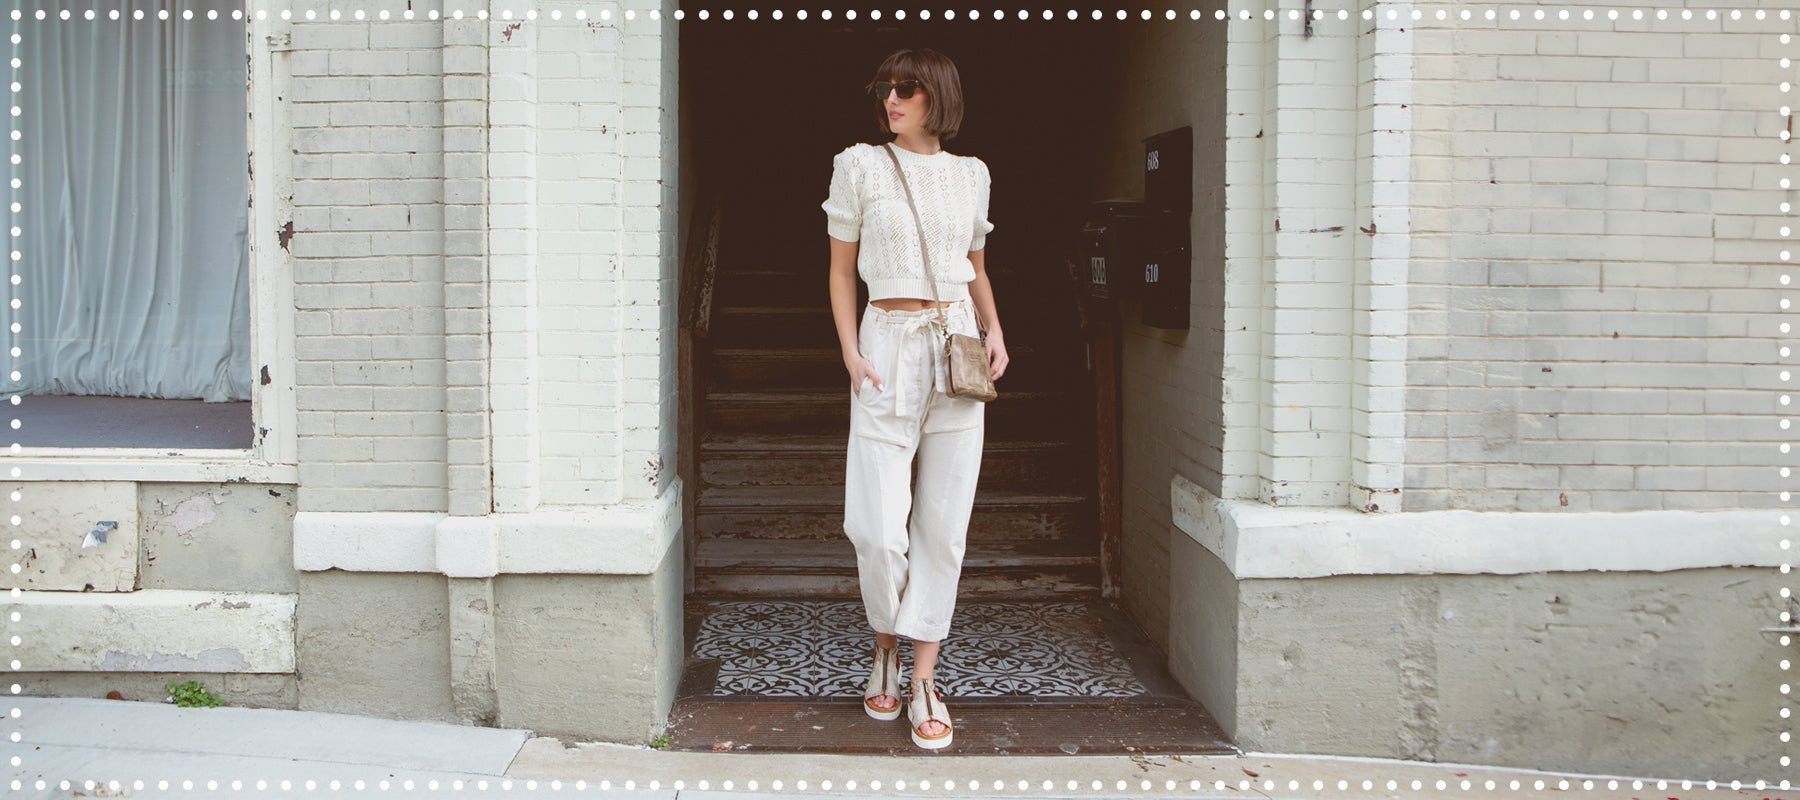 Woman in white crop top and trousers standing in a shadowed doorway, holding a beige purse, urban background.